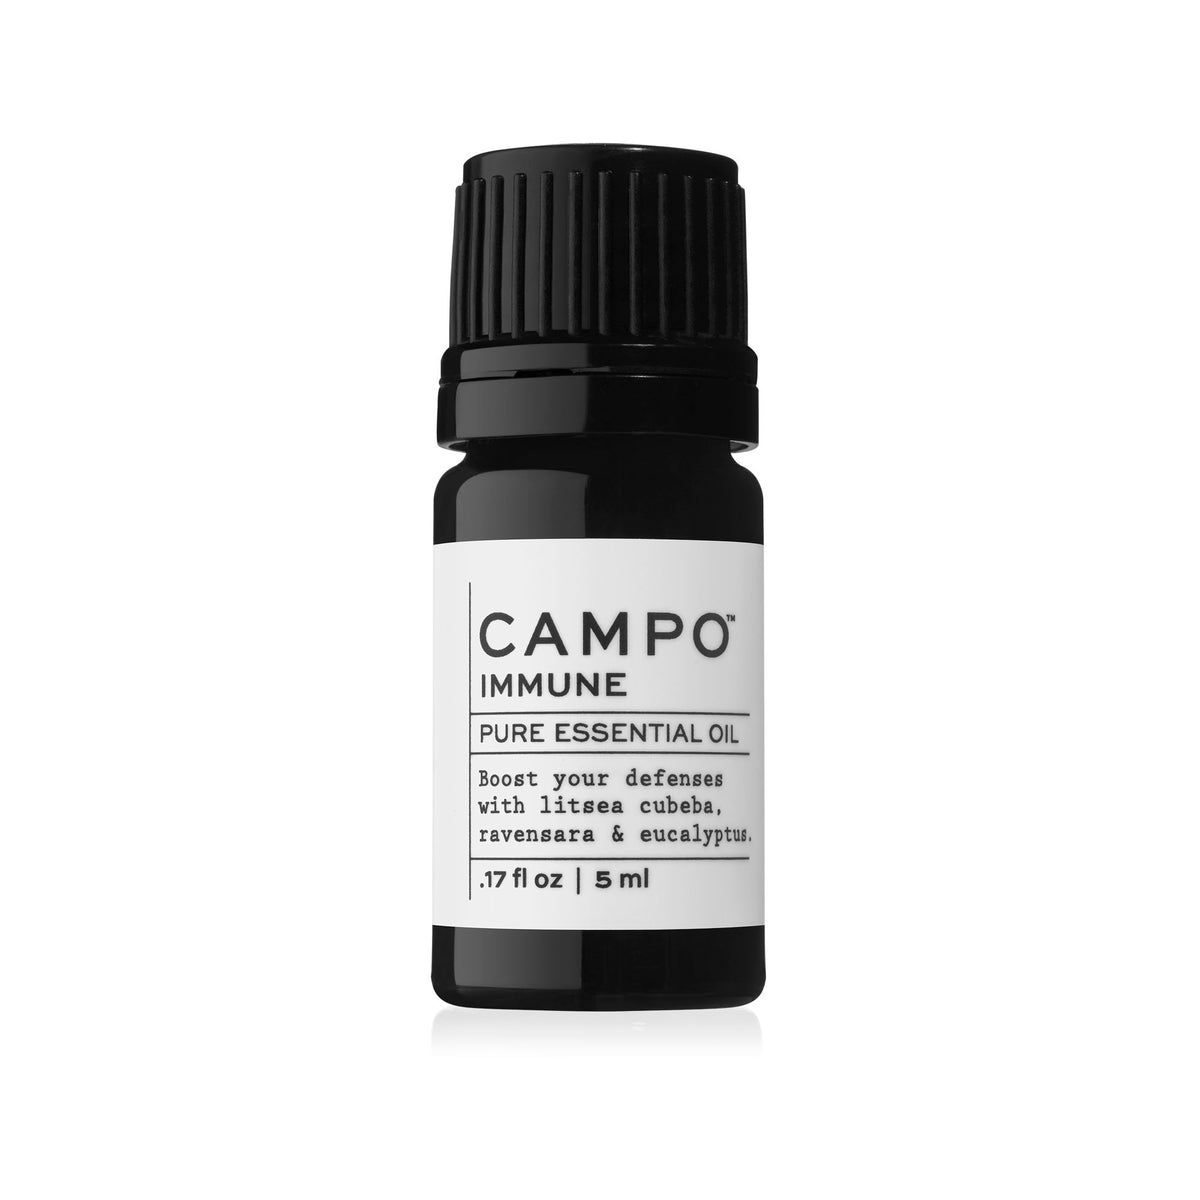 Campo Beauty IMMUNE Blend 5 ml Essential Oil. Boost your defenses with this 100% natural essential oil blend of litsea cubeba, ravensara &amp; eucalyptus.